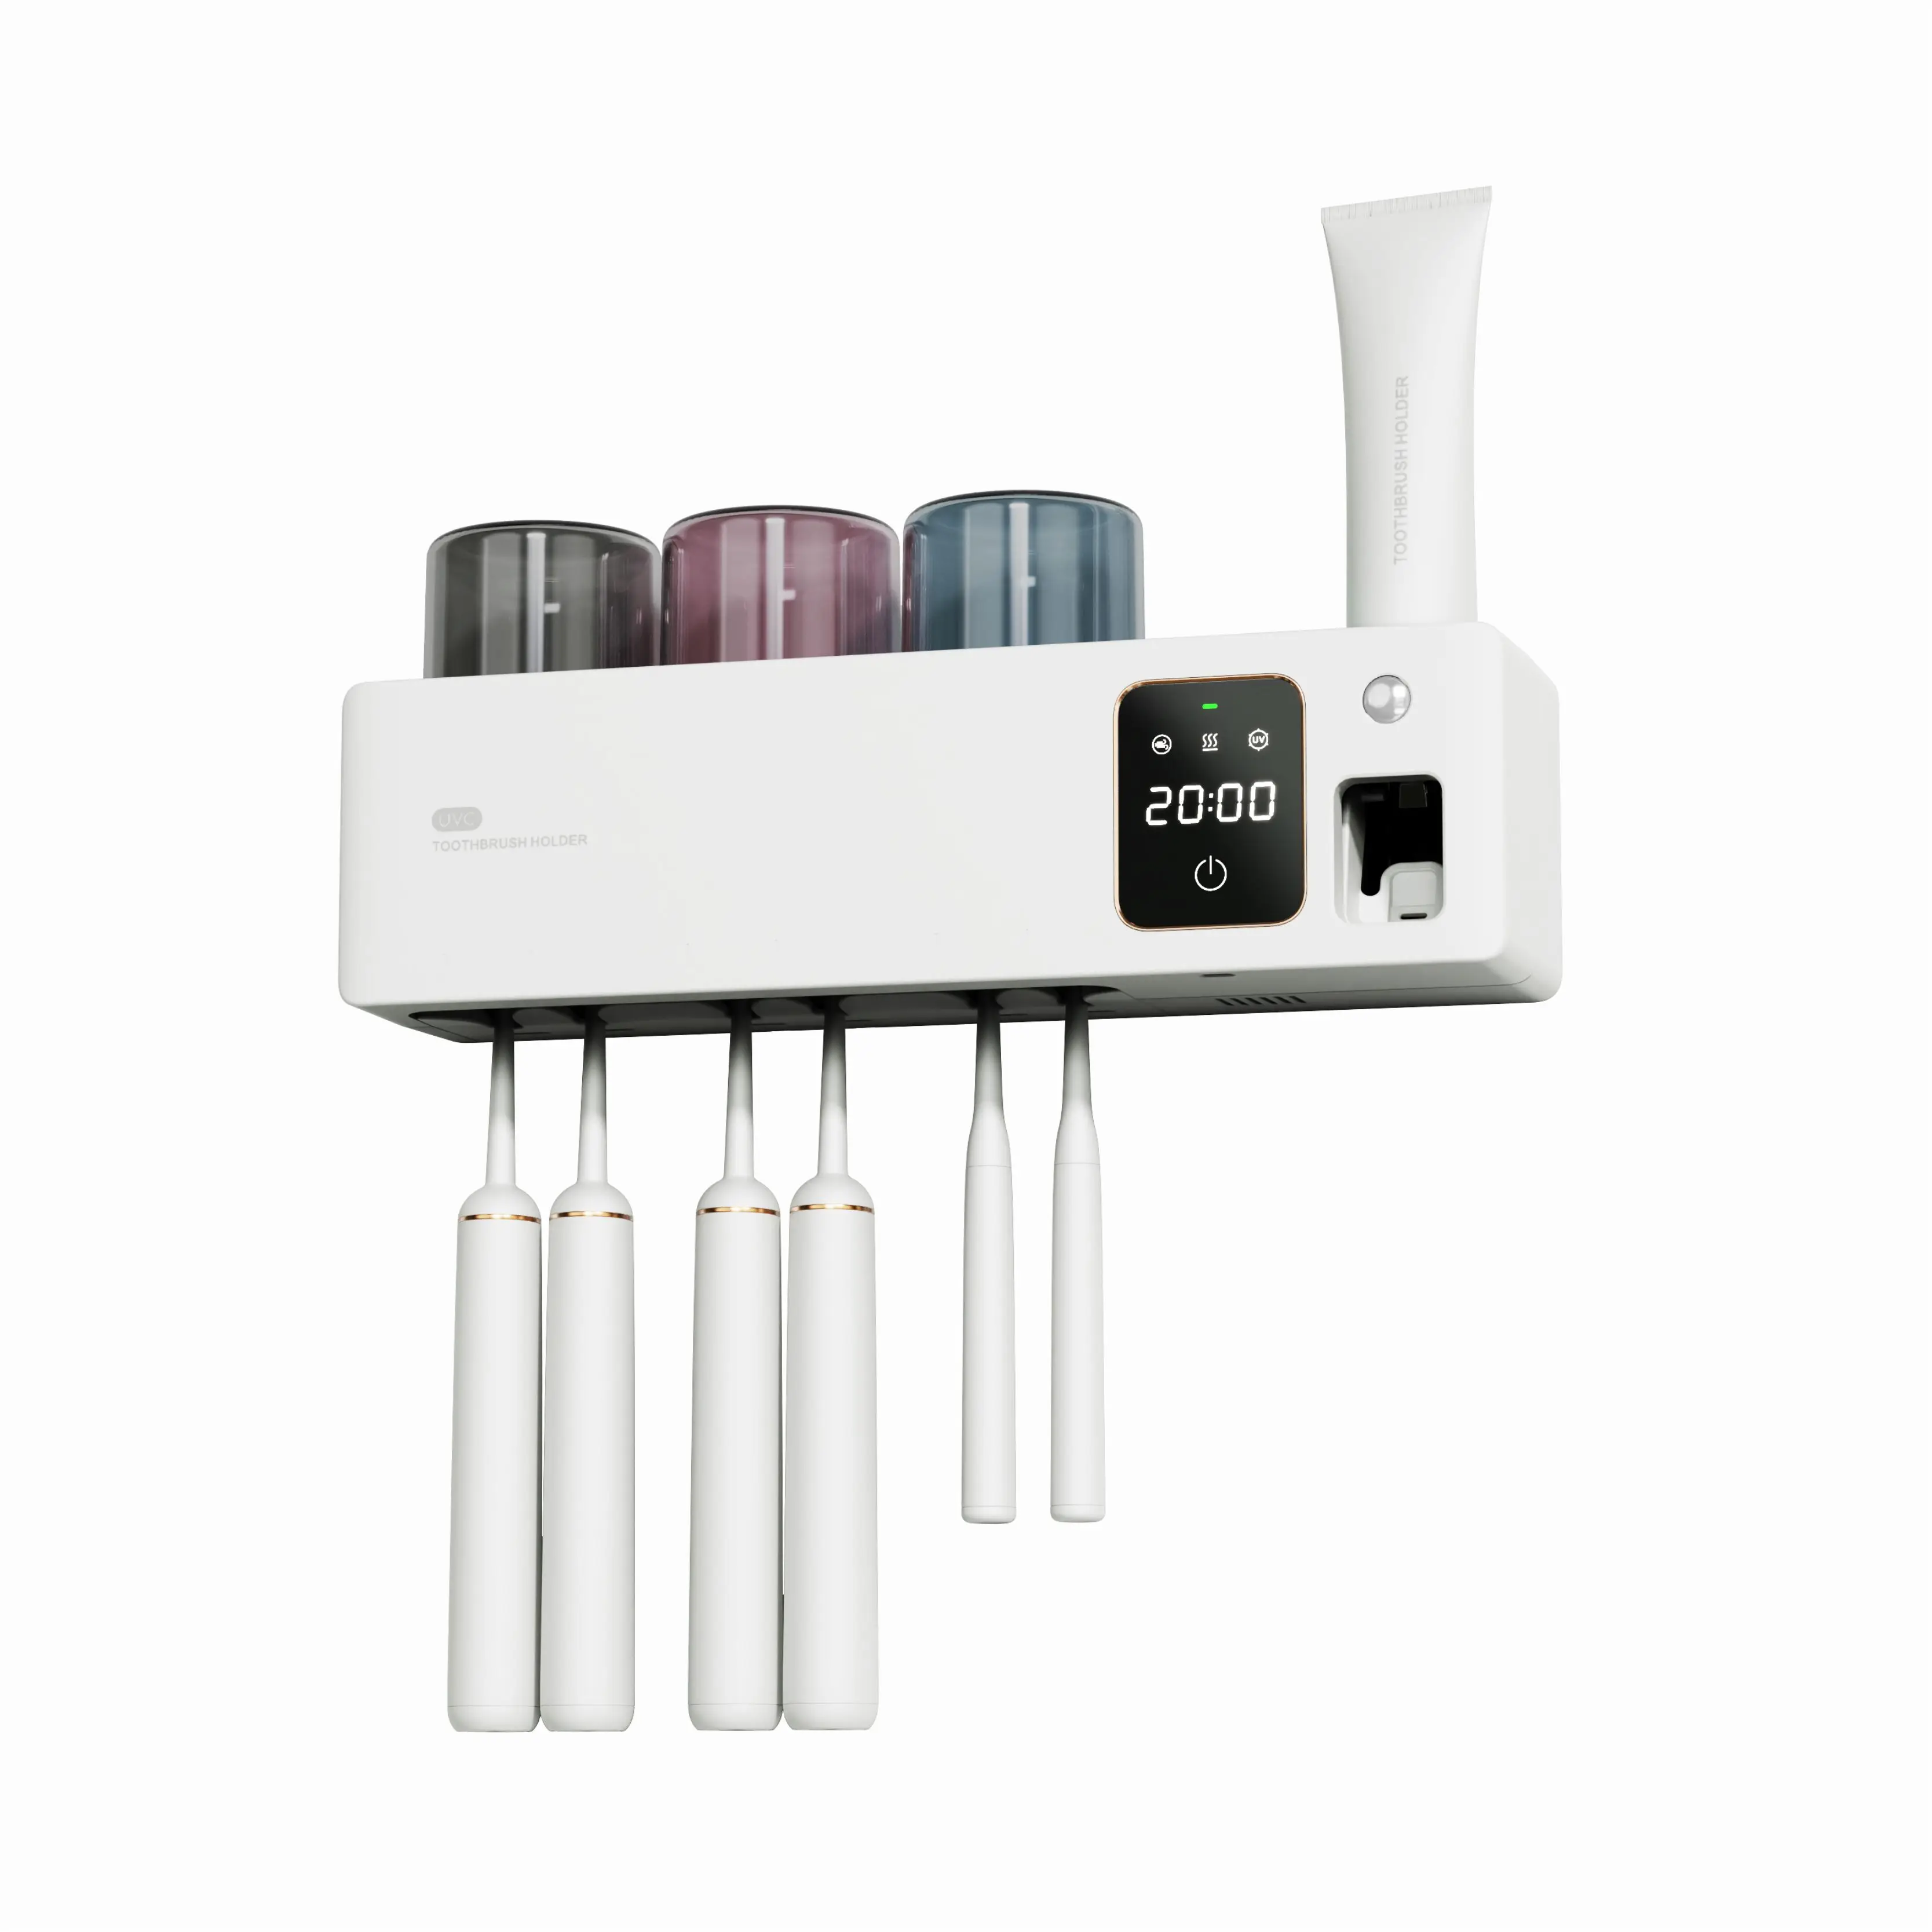 2022 Newly Designed Household Wall Mounted 8000mA Toothbrush Sterilizer Toothbrush Holder Toothpaste Dispenser